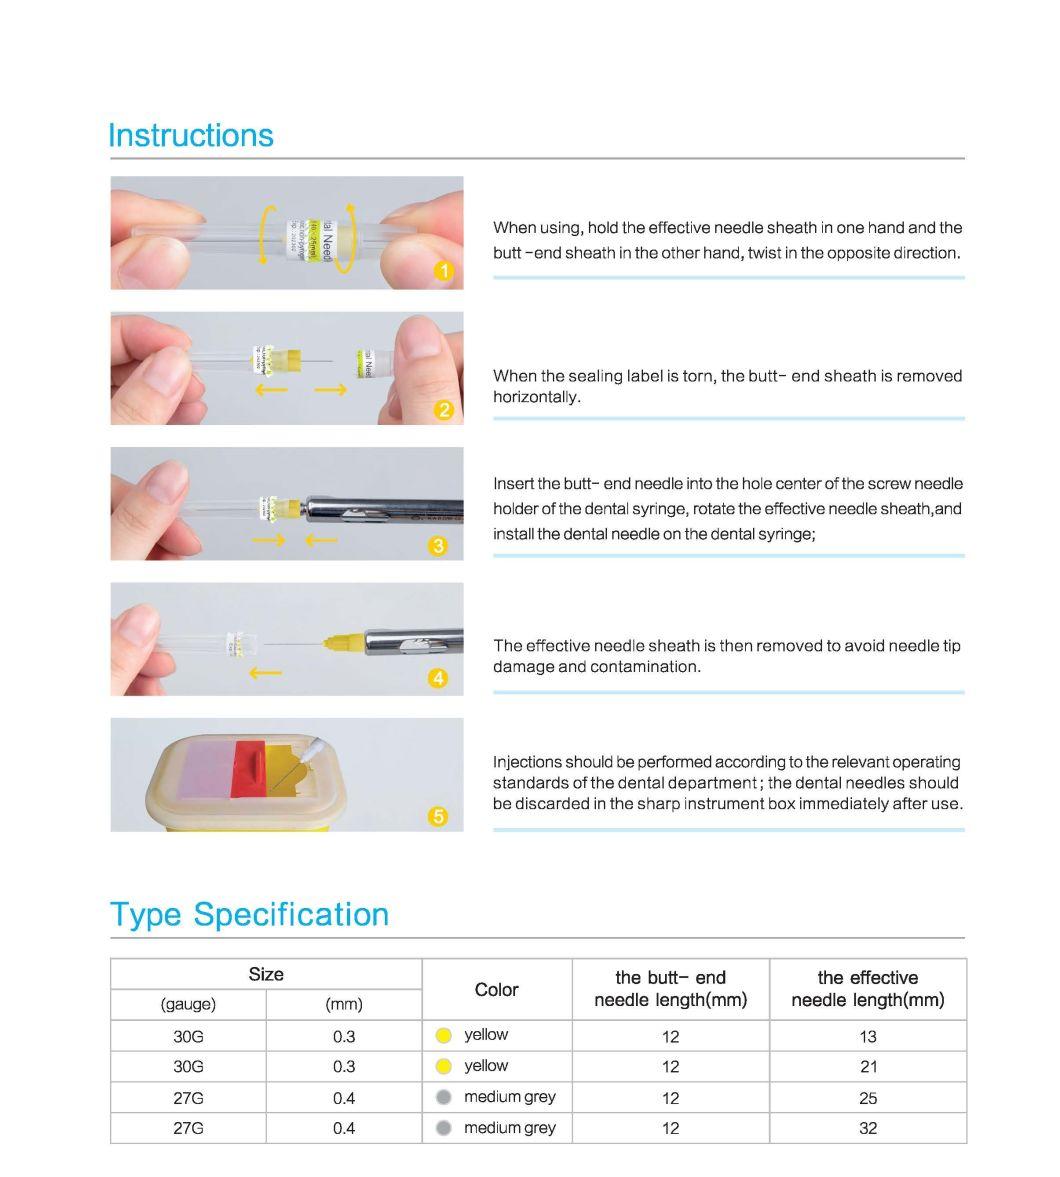 CE & ISO Certificated Painless Dental Anesthesia Injection Use Dental Needle